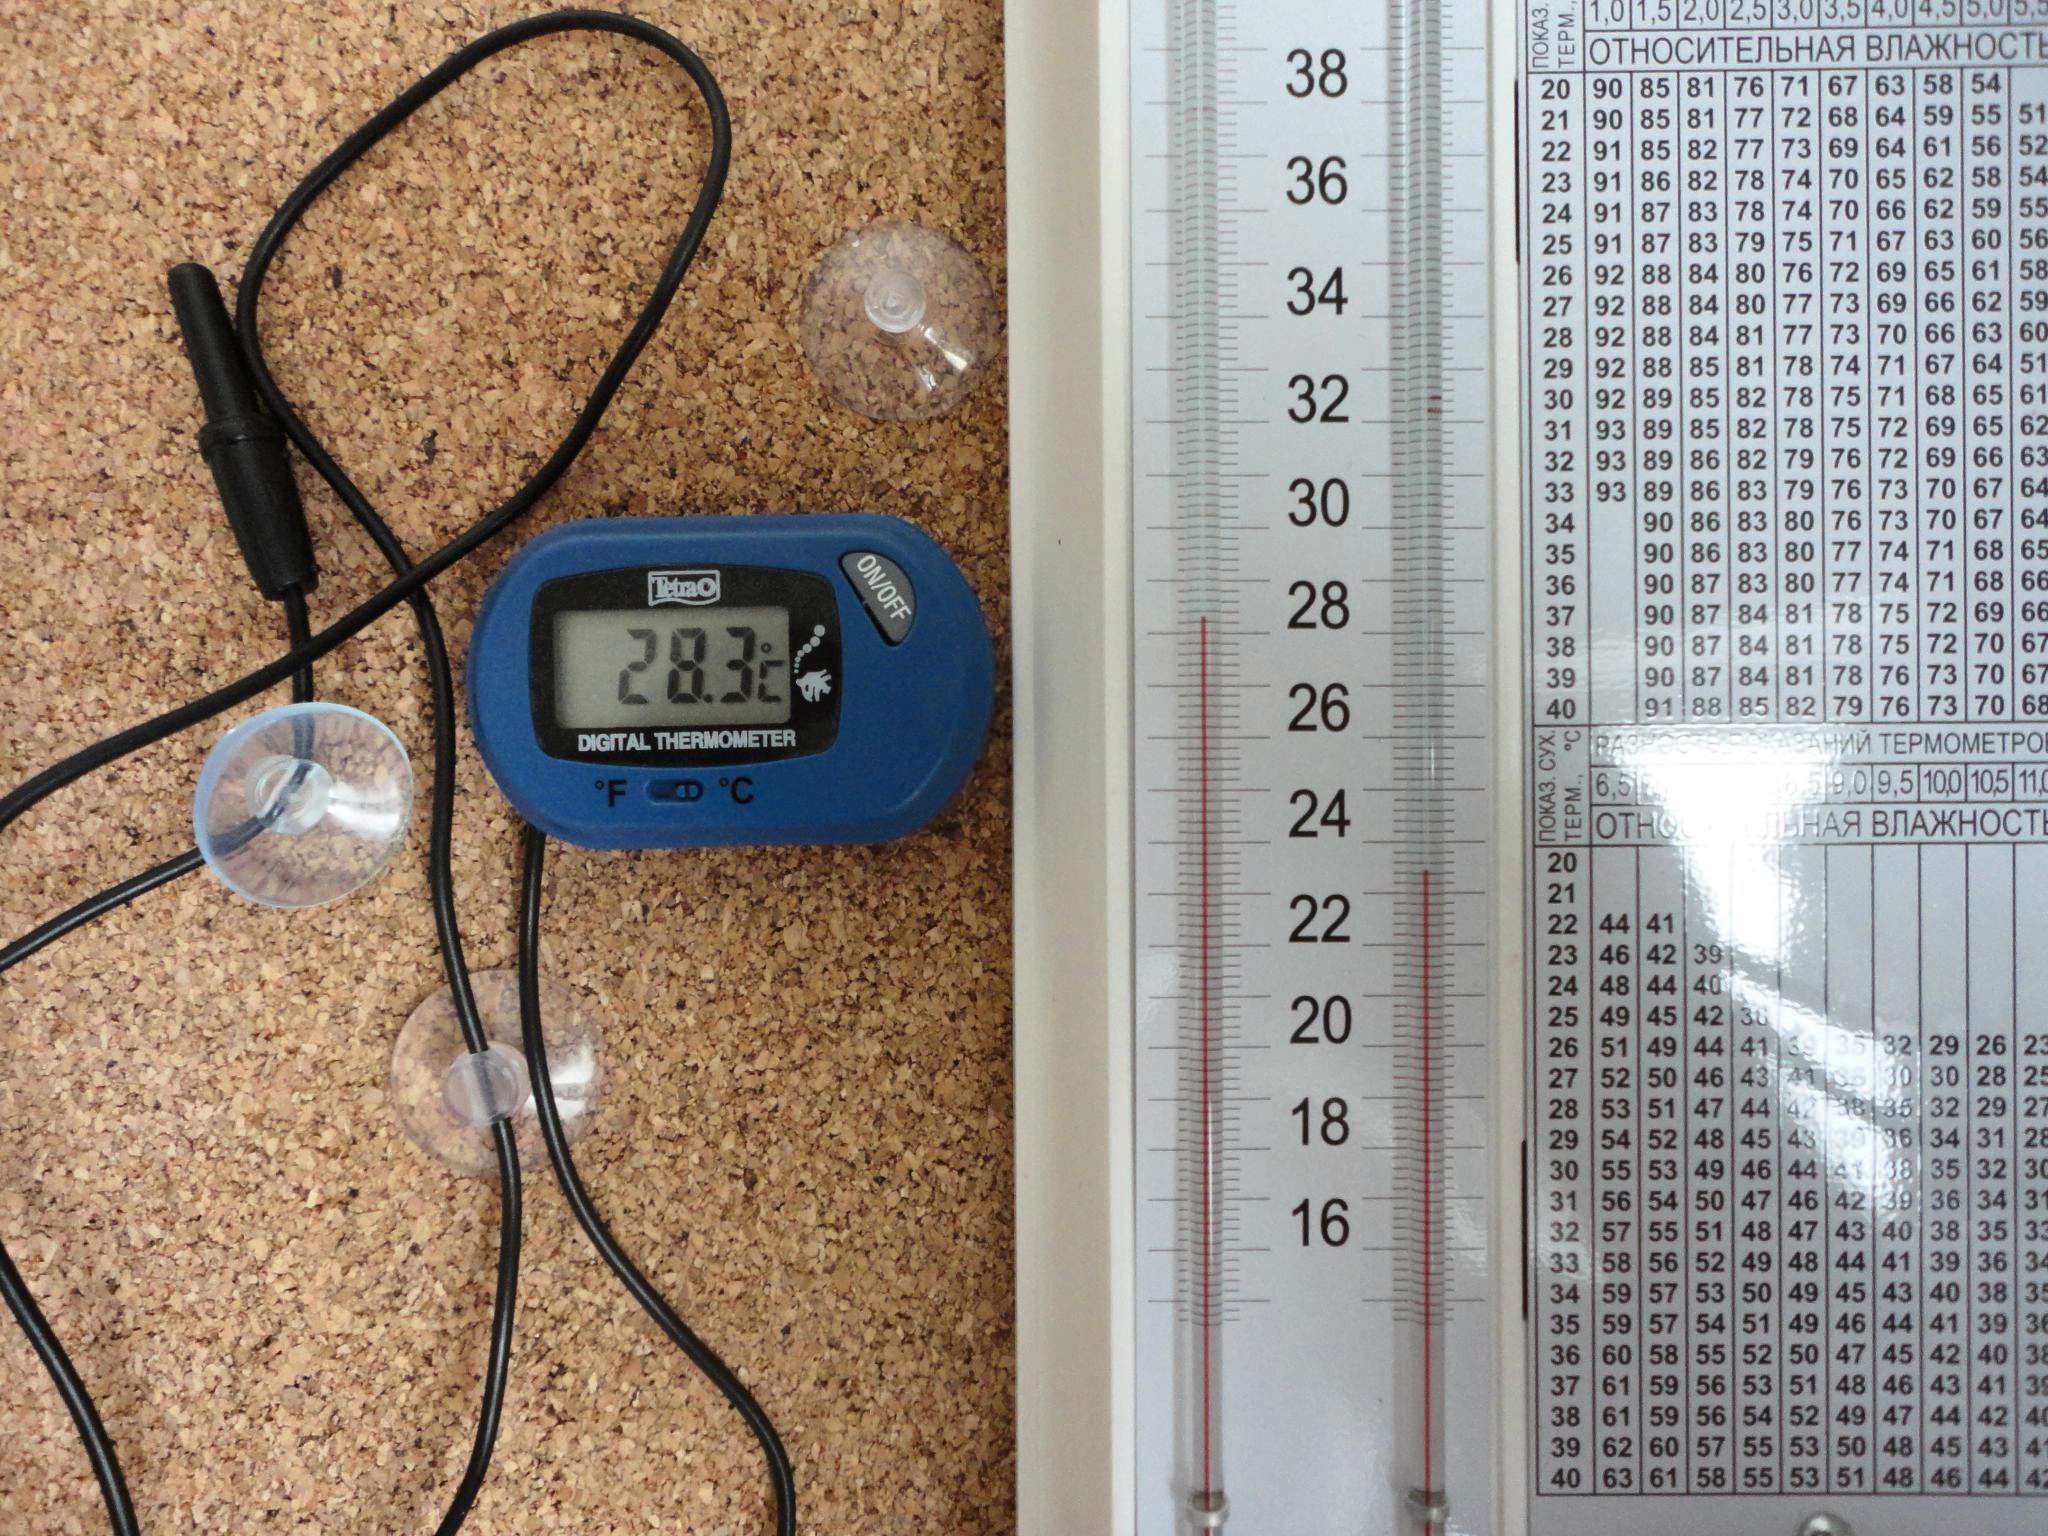 Tetra - TH Digital Thermometer